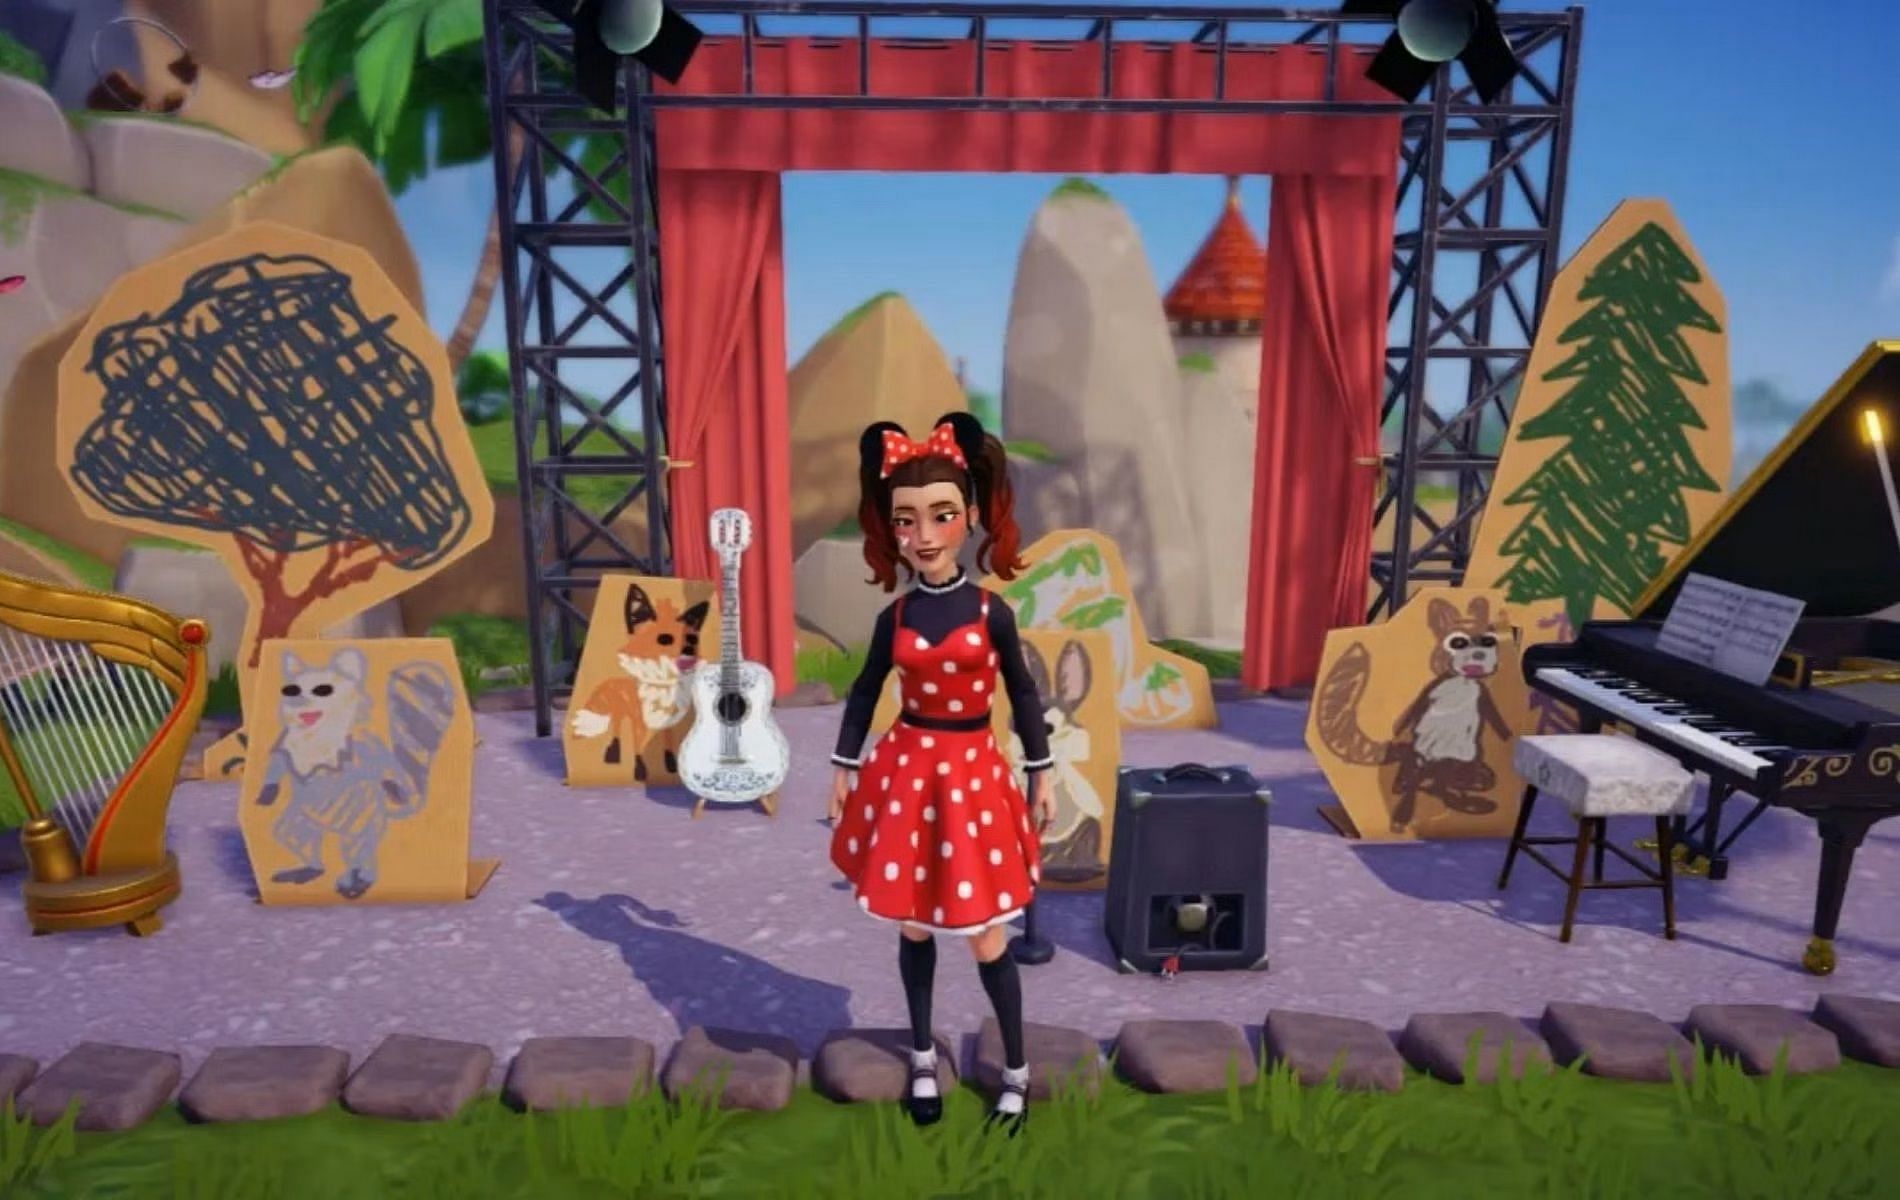 How to make a DJ set in Disney Dreamlight Valley